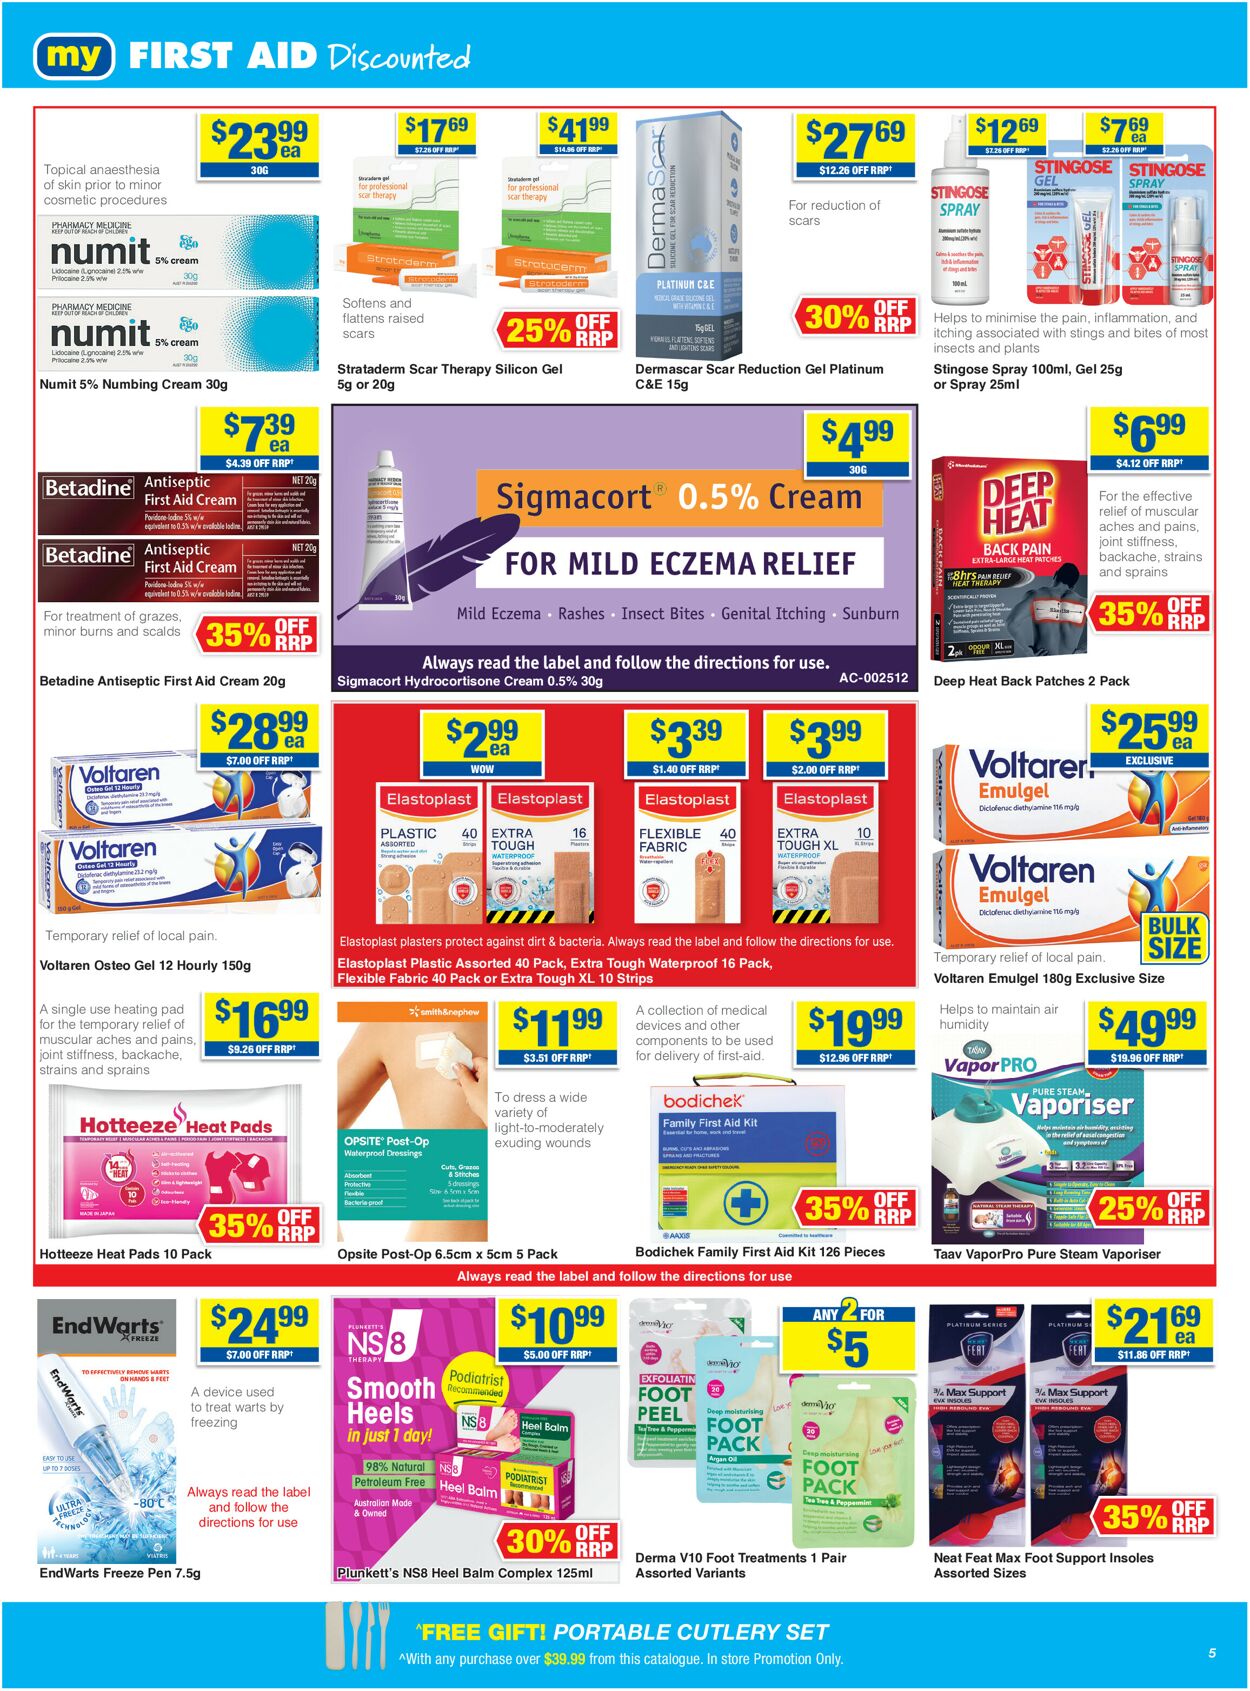 My Chemist Catalogue from 23/03/2023